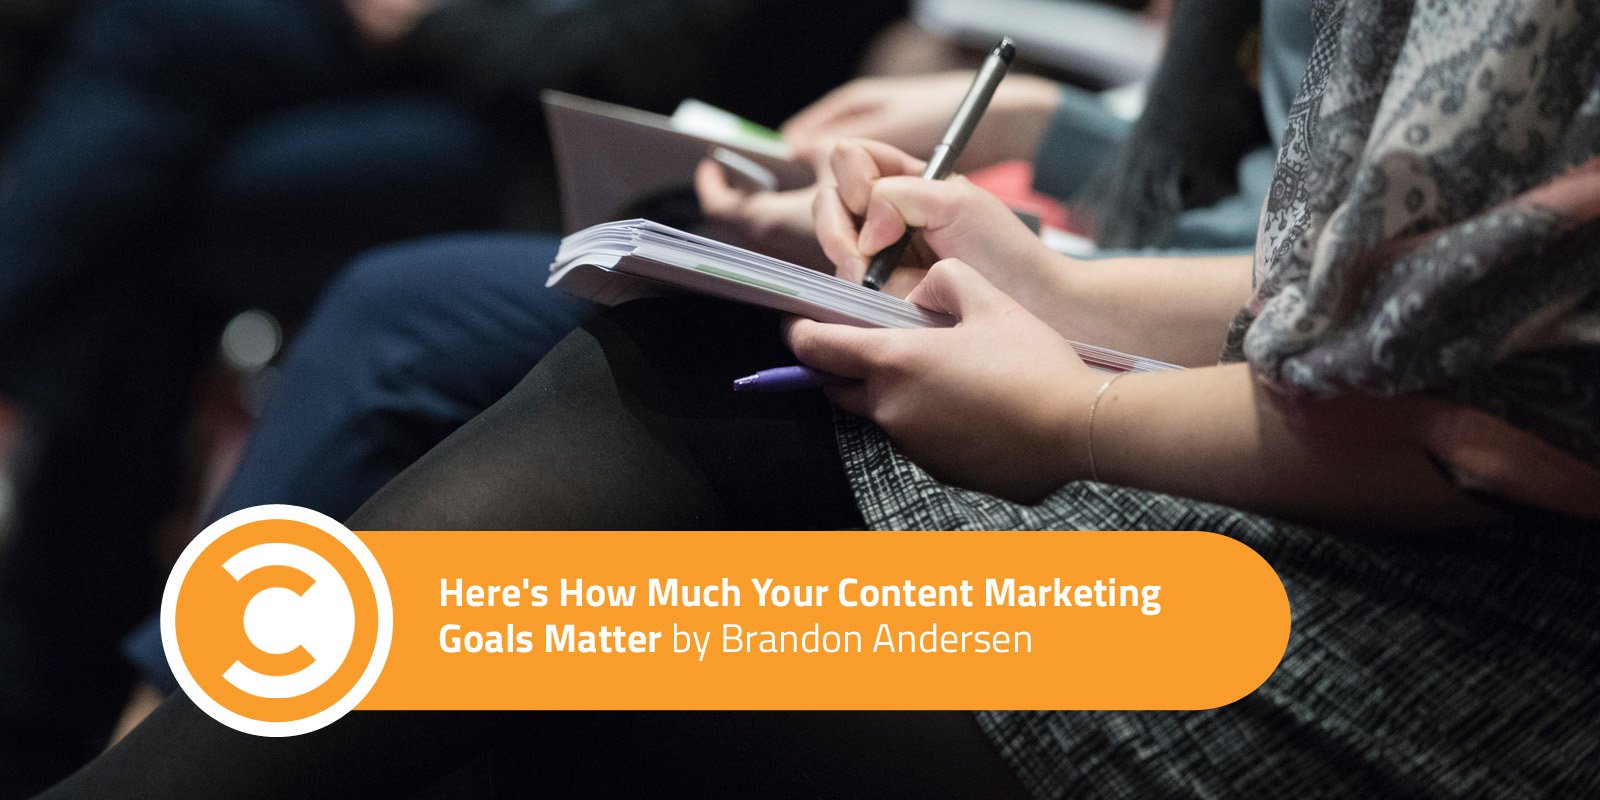 Here's How Much Your Content Marketing Goals Matter